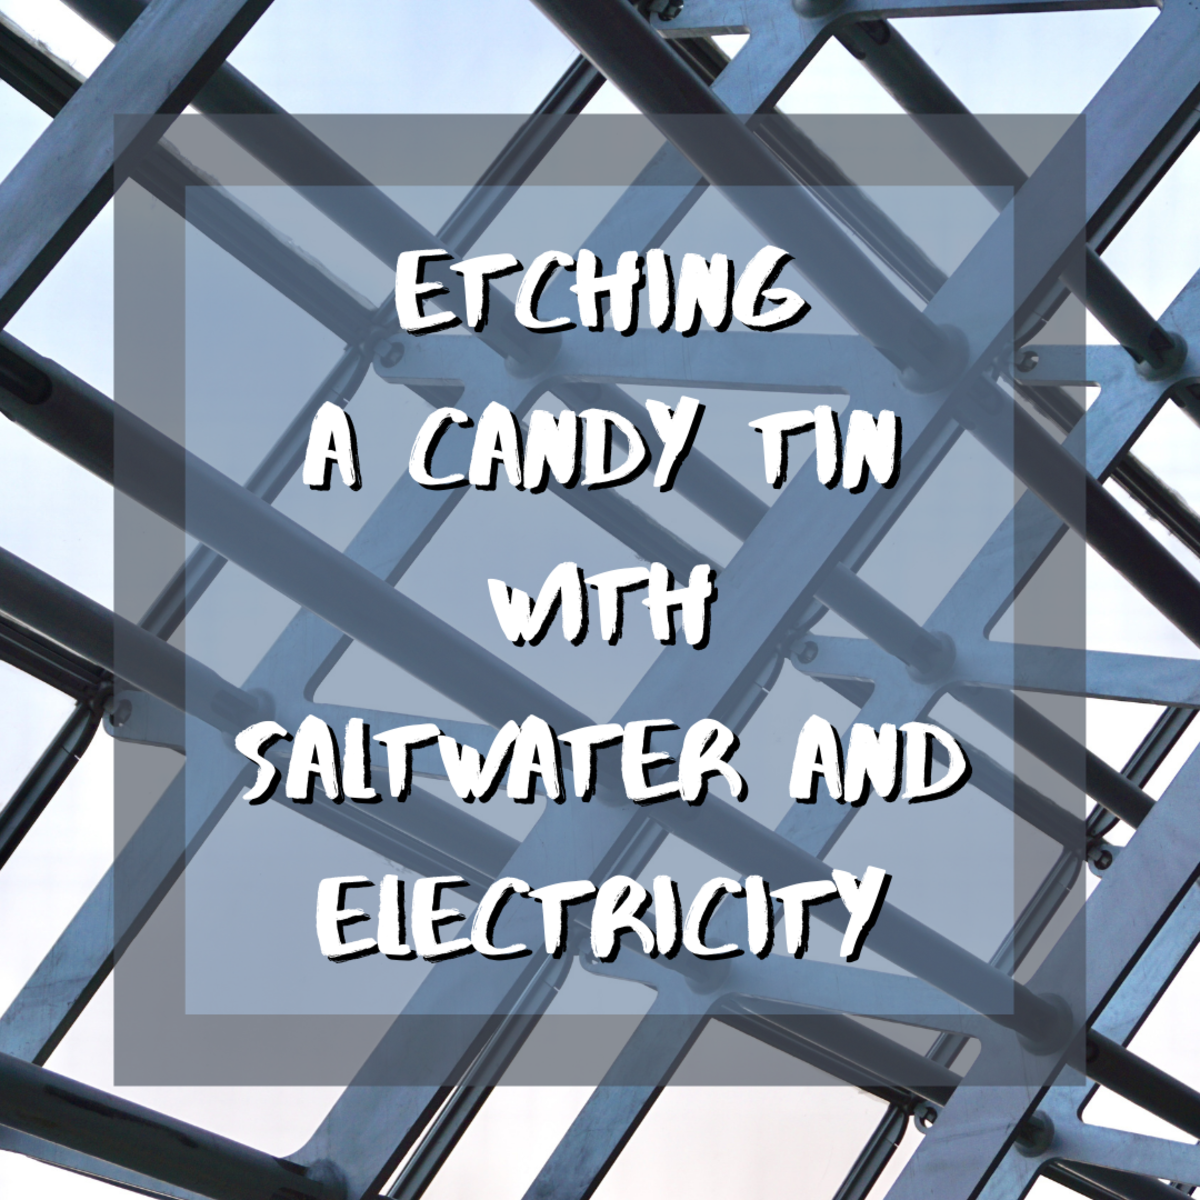 How to Etch a Candy Tin (With Photos)